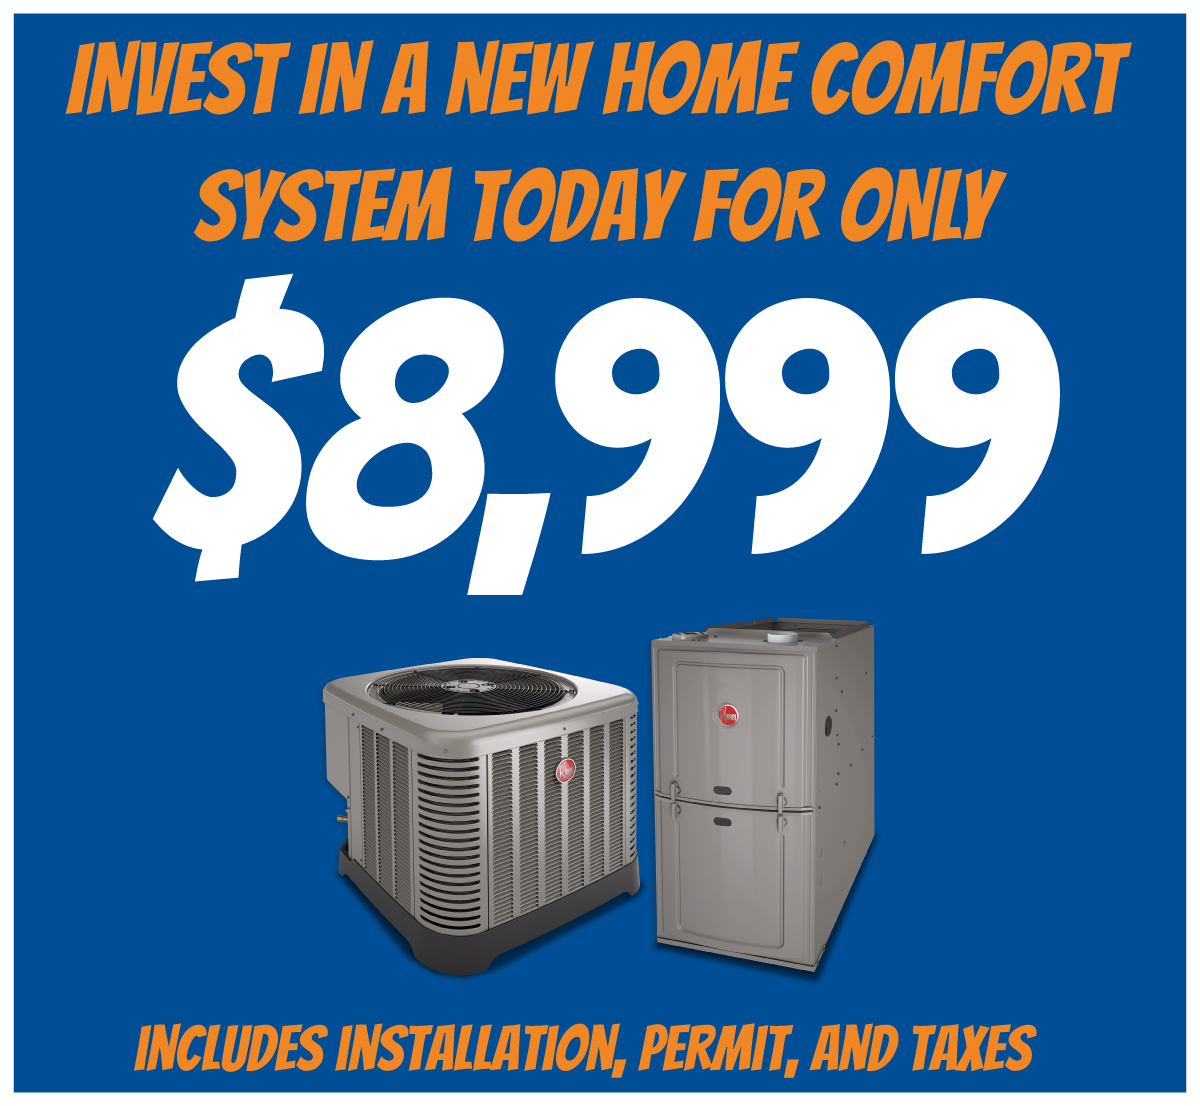 Invest in a new Home Comfort system for $8,999